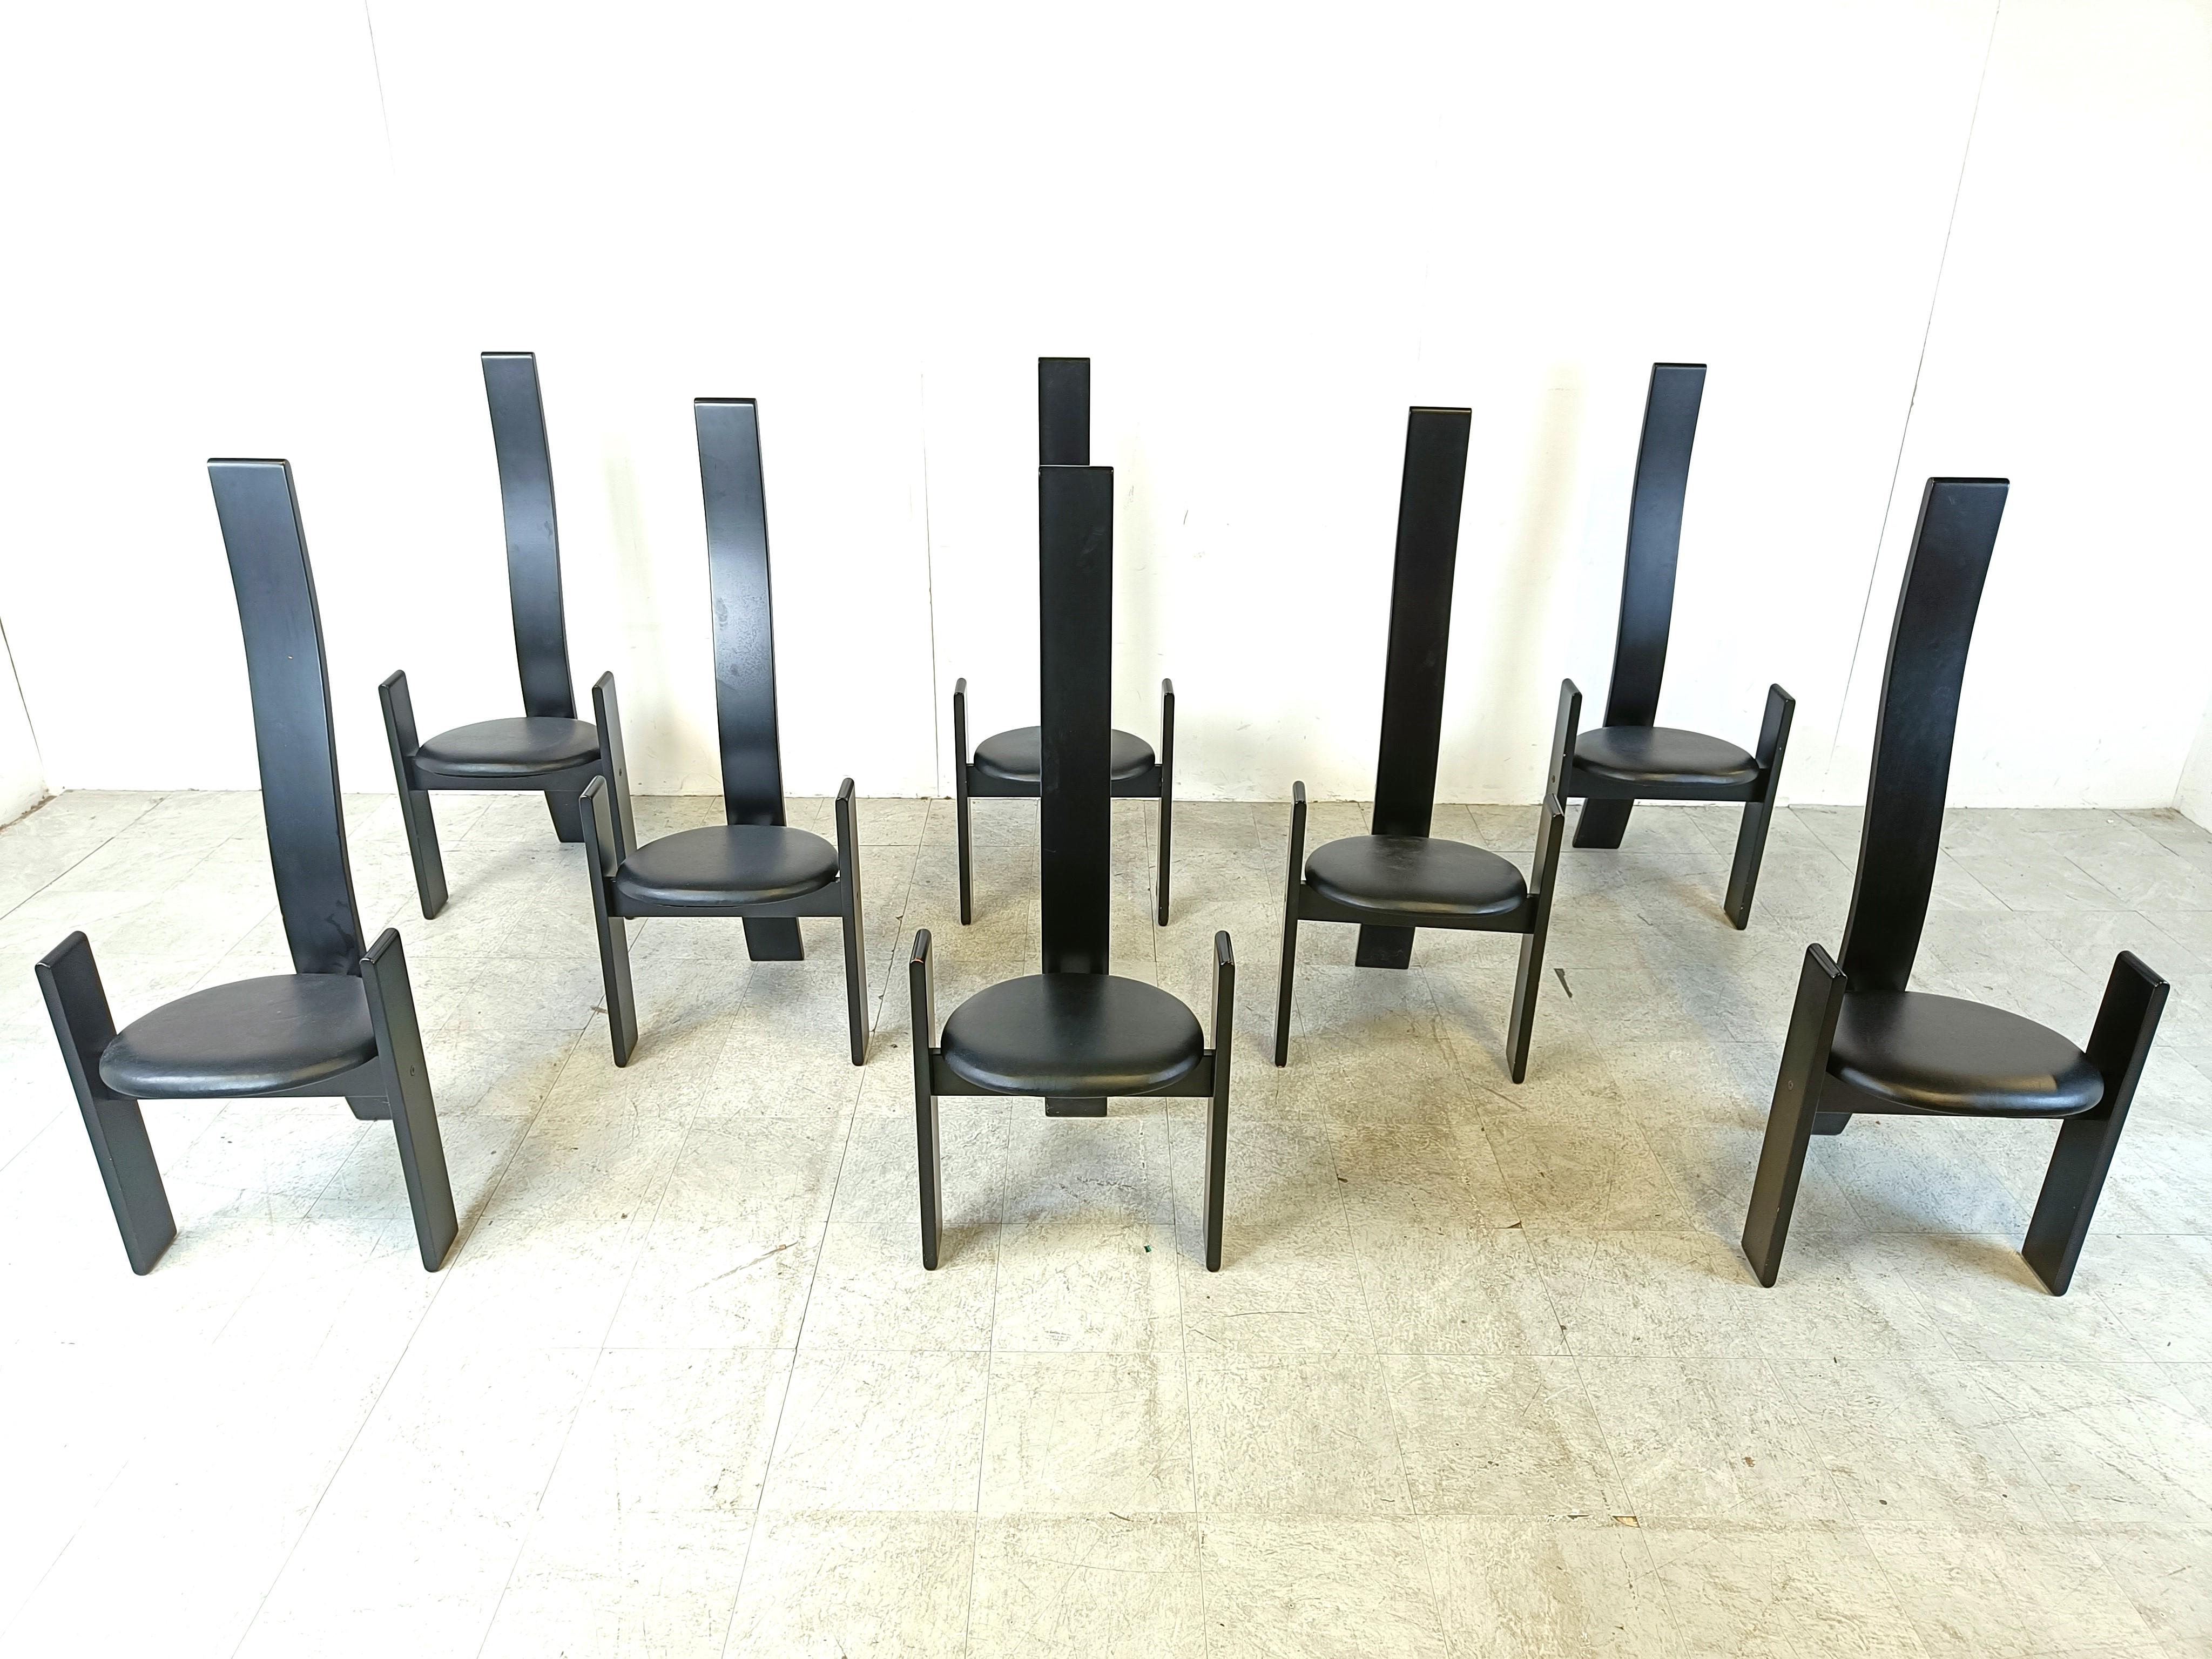 Set of 8 dining chairs model 'Golem' designed by Vico Magistretti voor Poggi.

The chairs are made of black lacquered wood and upholstered with black skai.

Beautiful slim and modern design.

Good condition, normal age related wear

The chair with